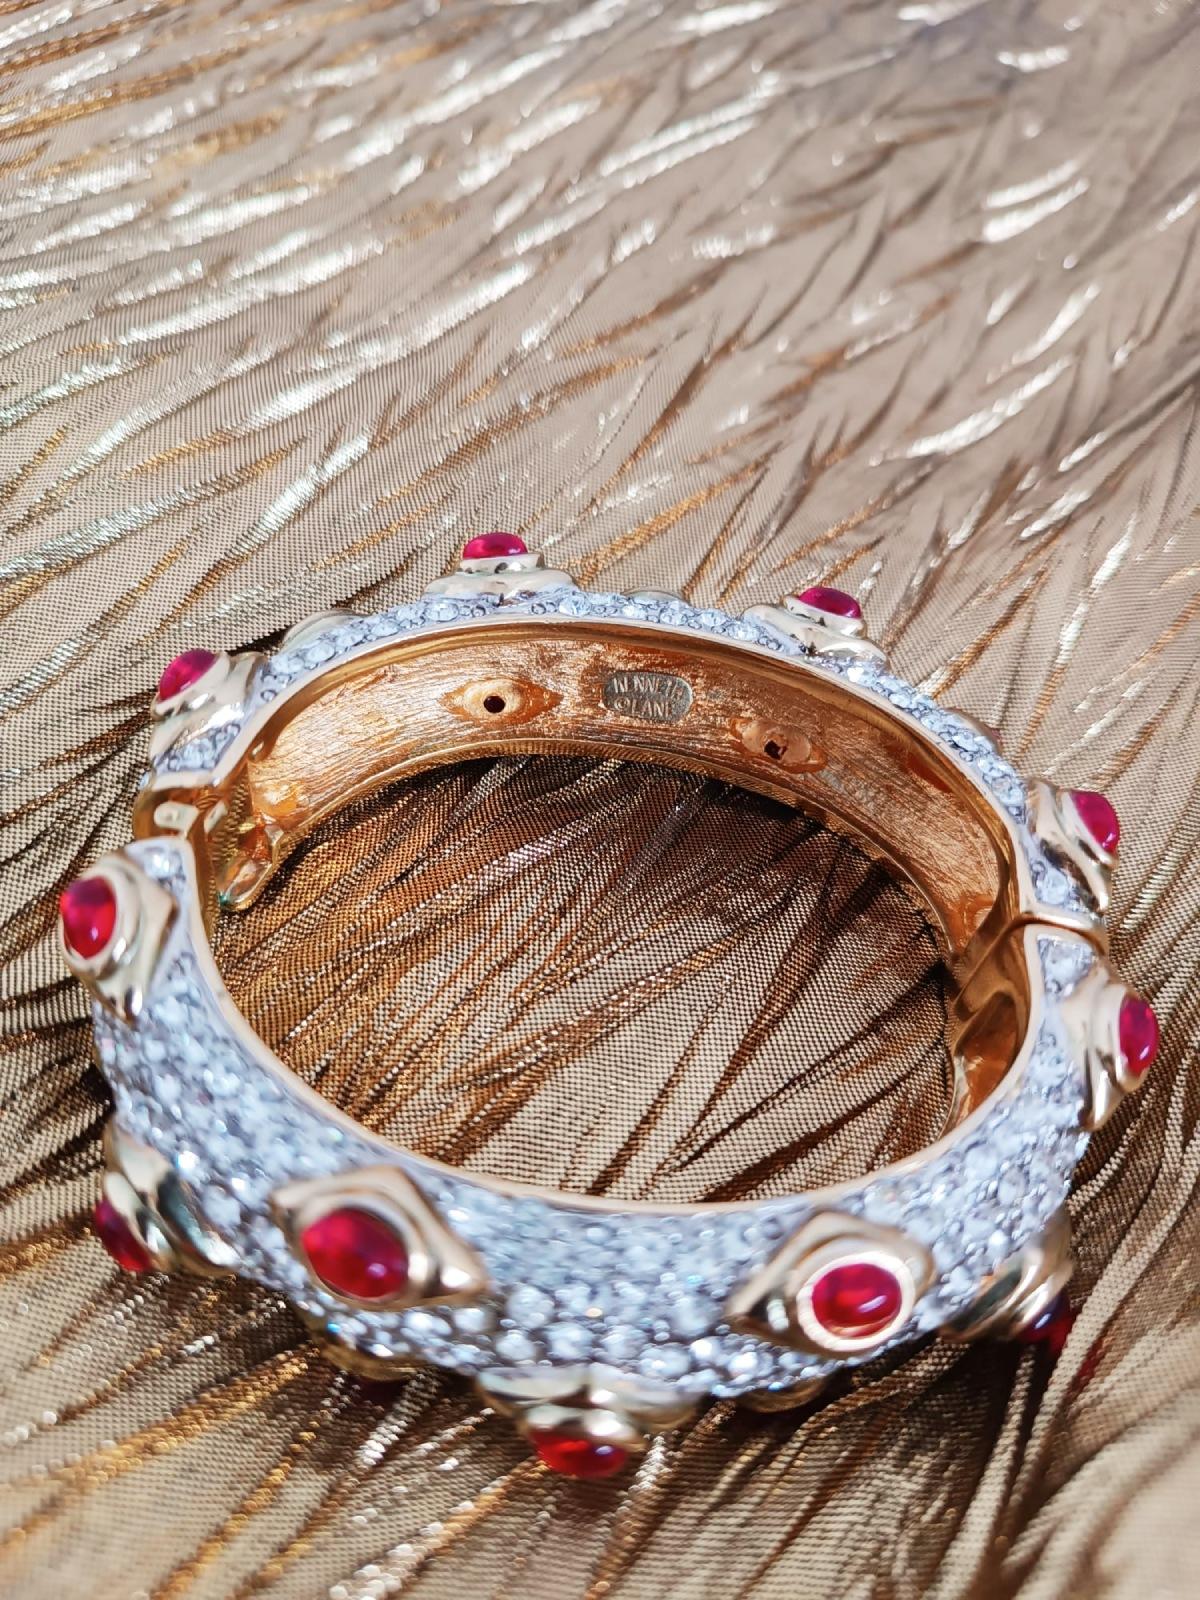 Kenneth Lane Gold Bracelet with Red Stones For Sale 13